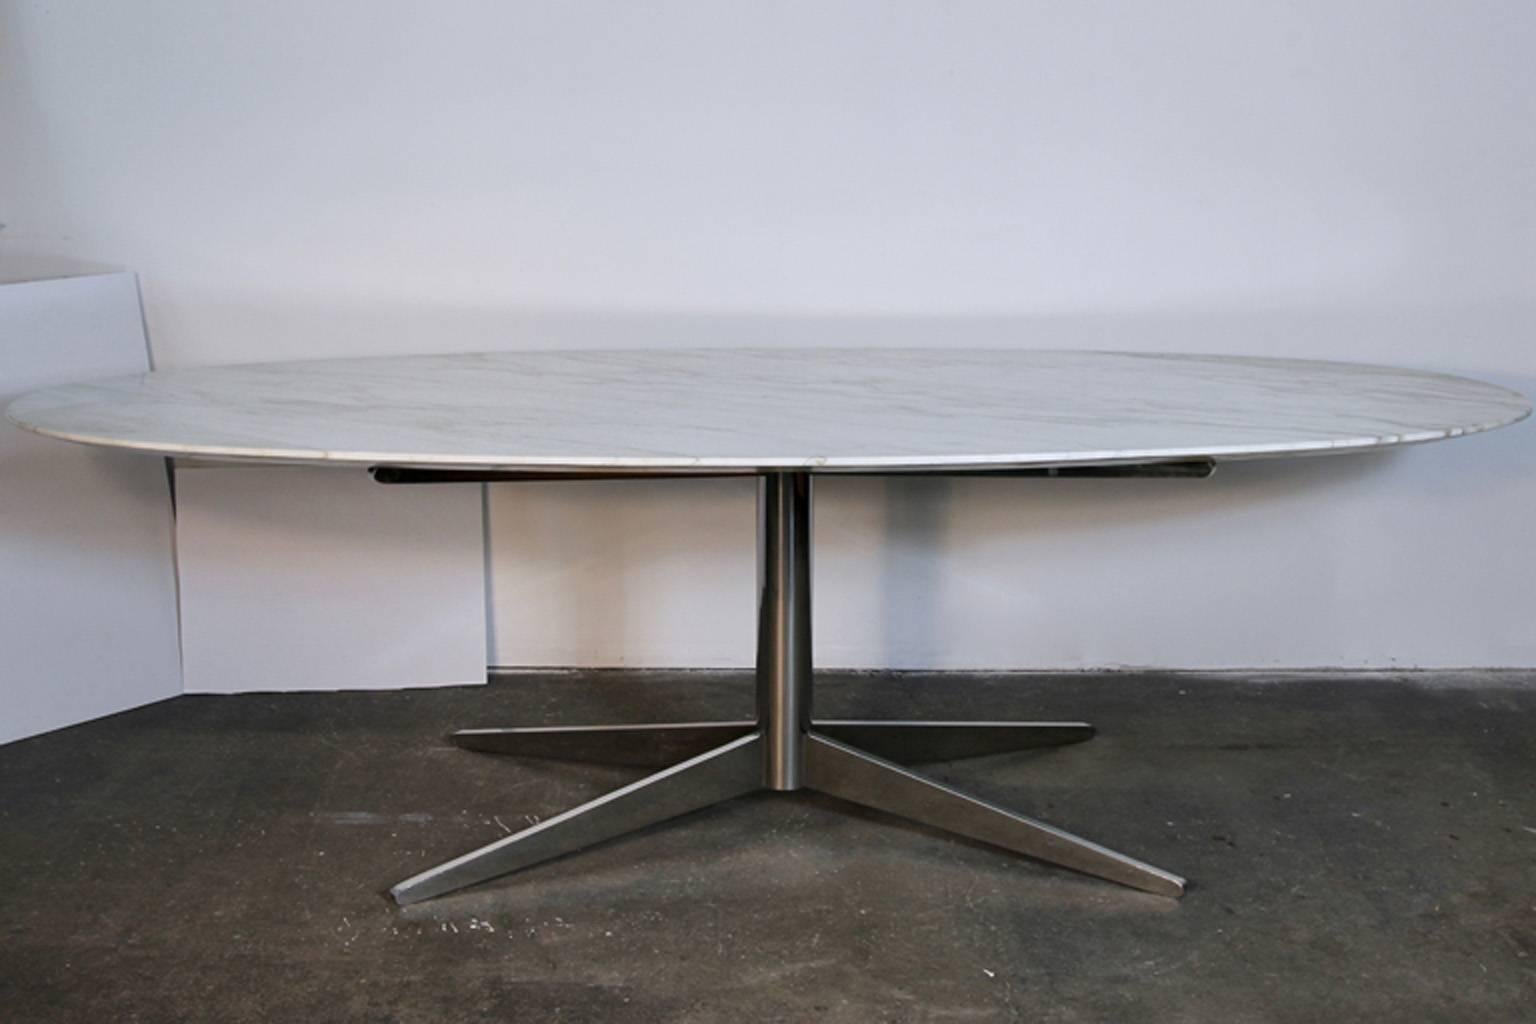 Incredible Knoll style Calcutta marble-top dining table. Knife edge, very thick and heavy top in the manner of Knoll with the chrome X-base. But much thicker, heavier sturdy construction and longer than the standard 96 Knoll table at 104 inches.